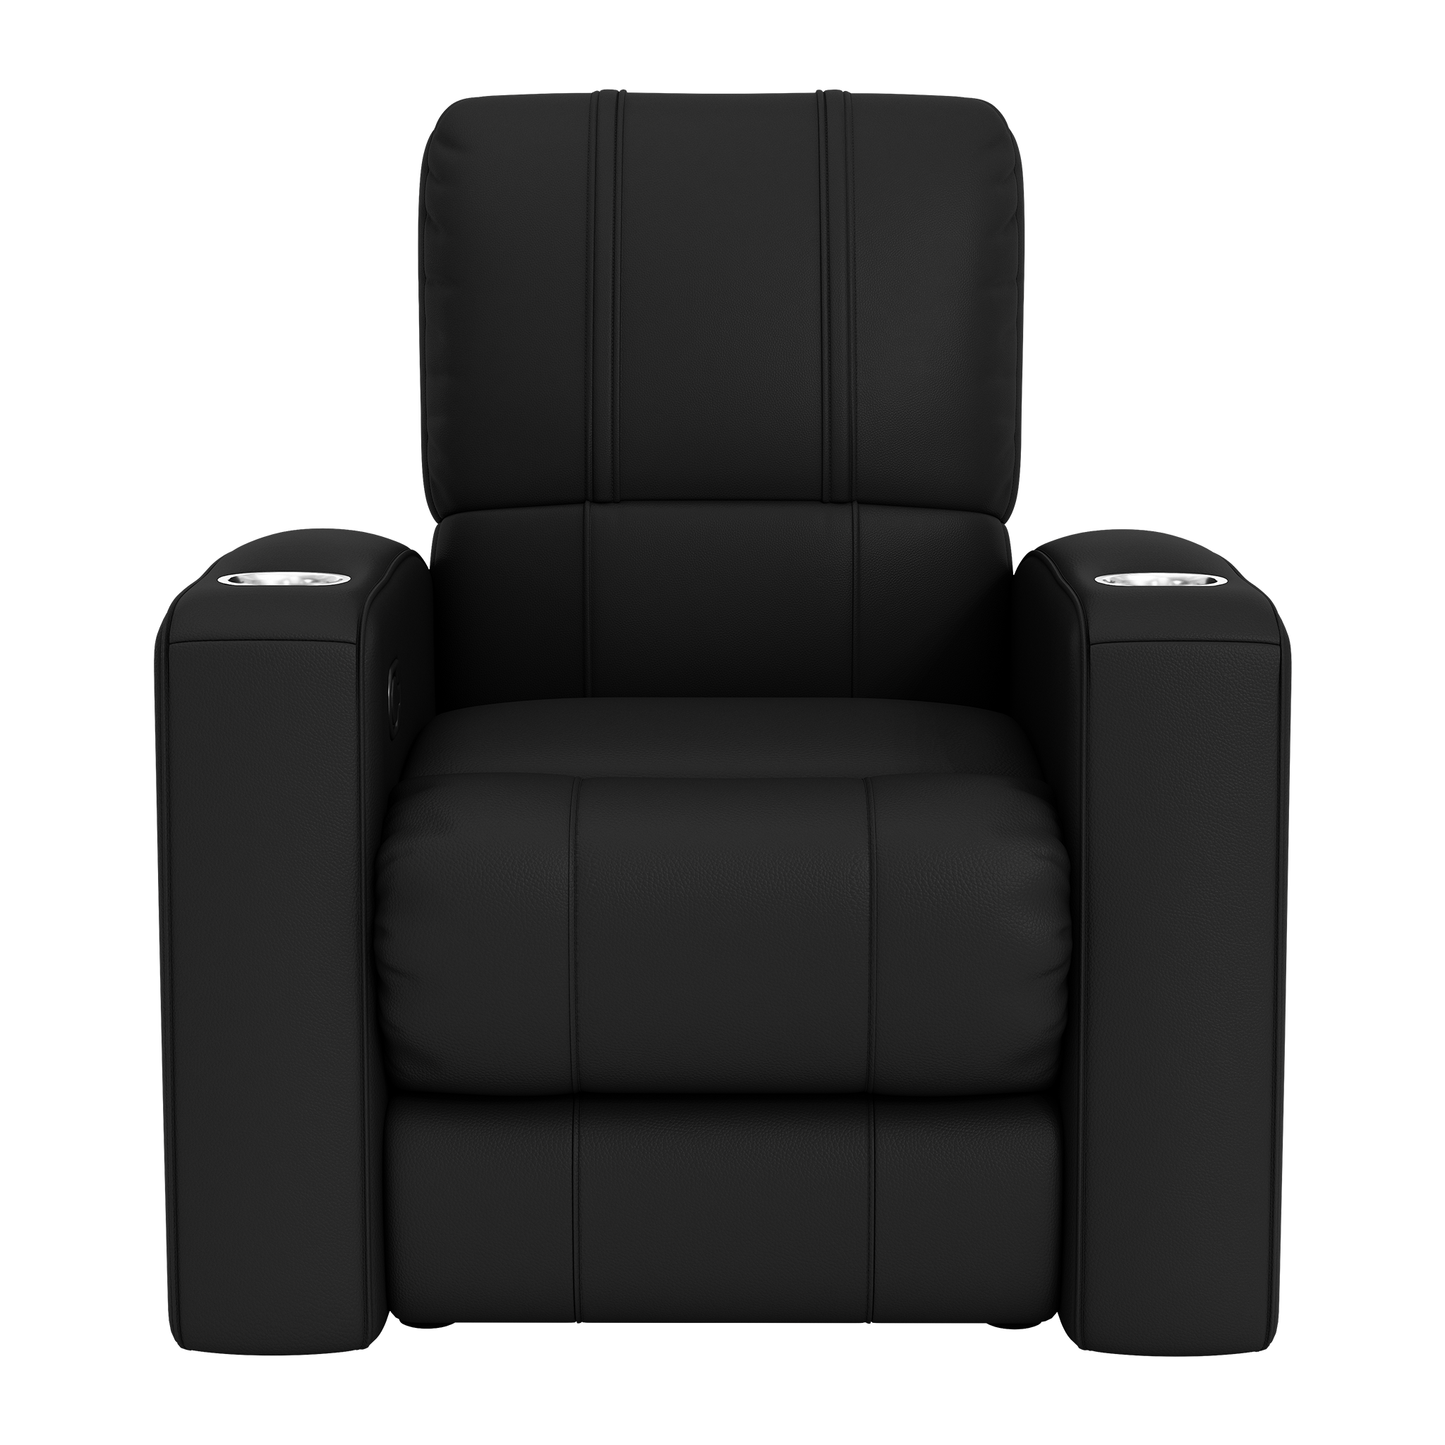 Relax Home Theater Recliner with  Las Vegas Raiders Primary Logo